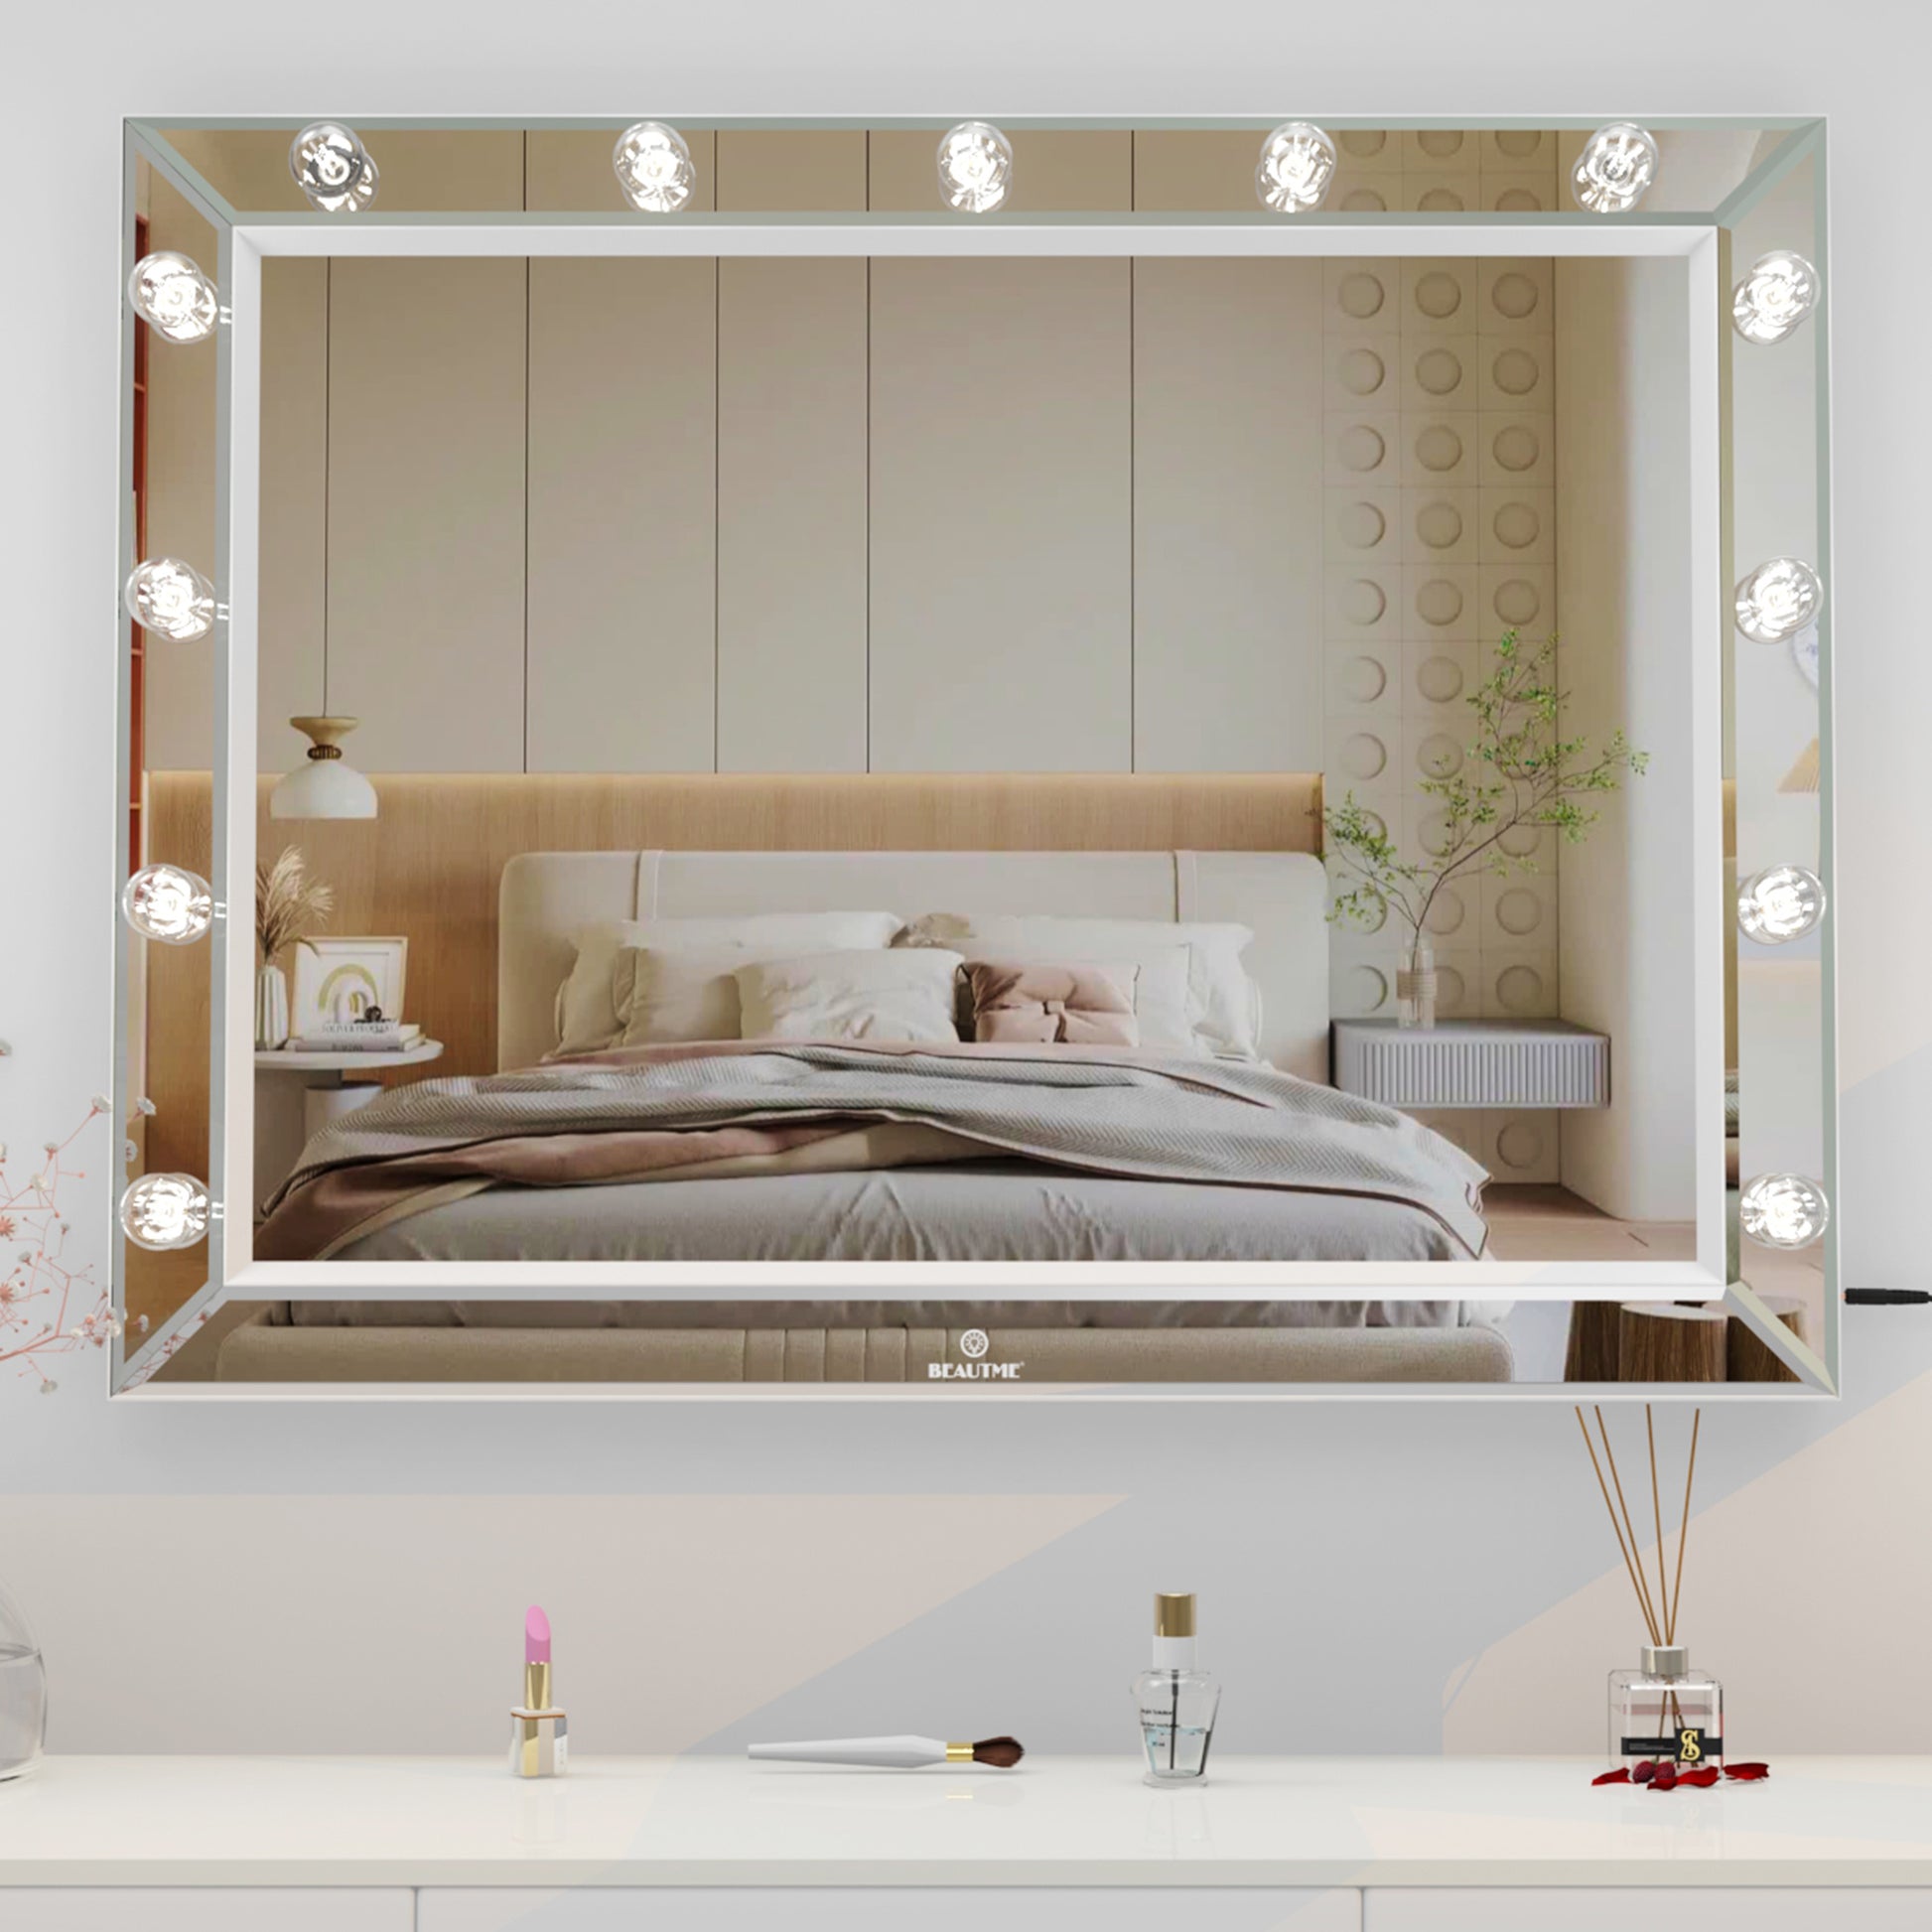 Hollywood Vanity Mirror with Uss Bulbs Luxury Vanity Mirror with Lights Large Size Makeup Mirror for Bedroom Makeup Room, Smart Touch White Lighting,40x30.5 inch - lolaluxeshop